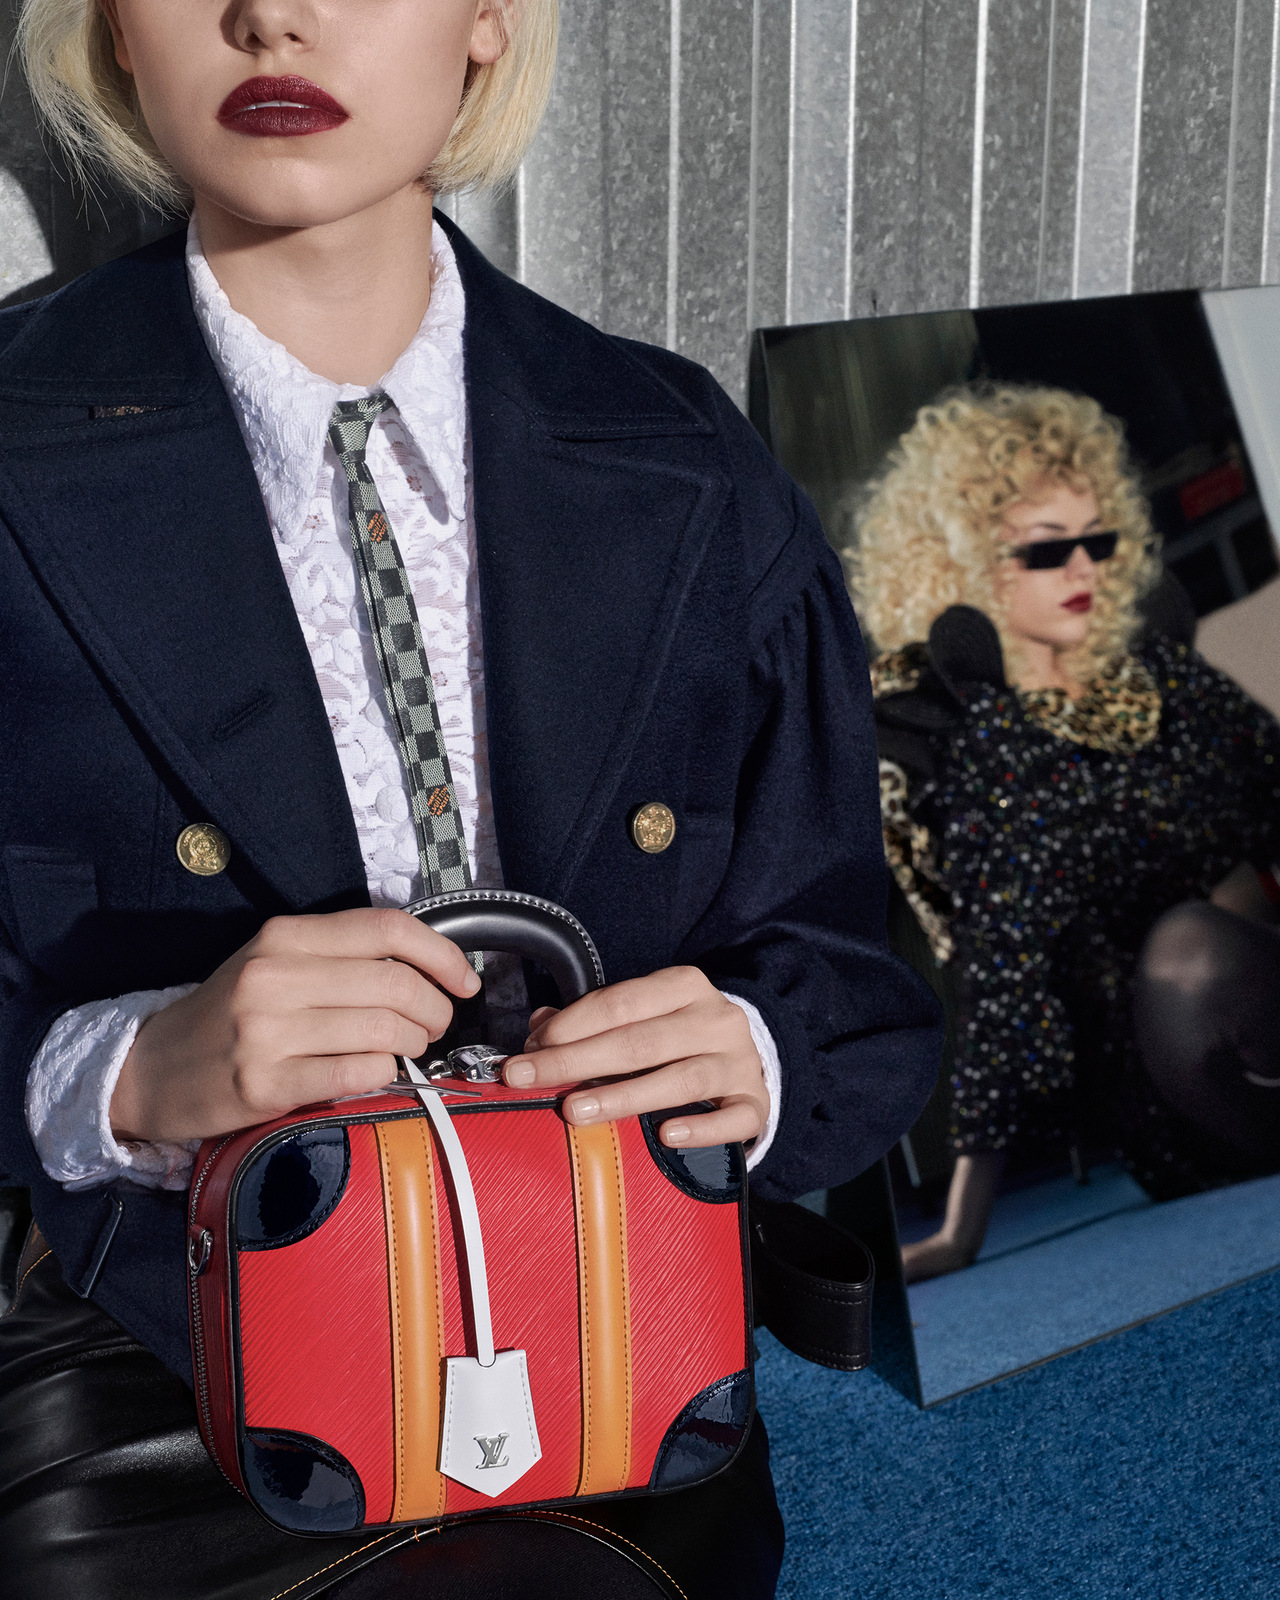 Louis Vuitton Fall 2019 Ad Campaign by Ronnie Cooke Newhouse | The Impression